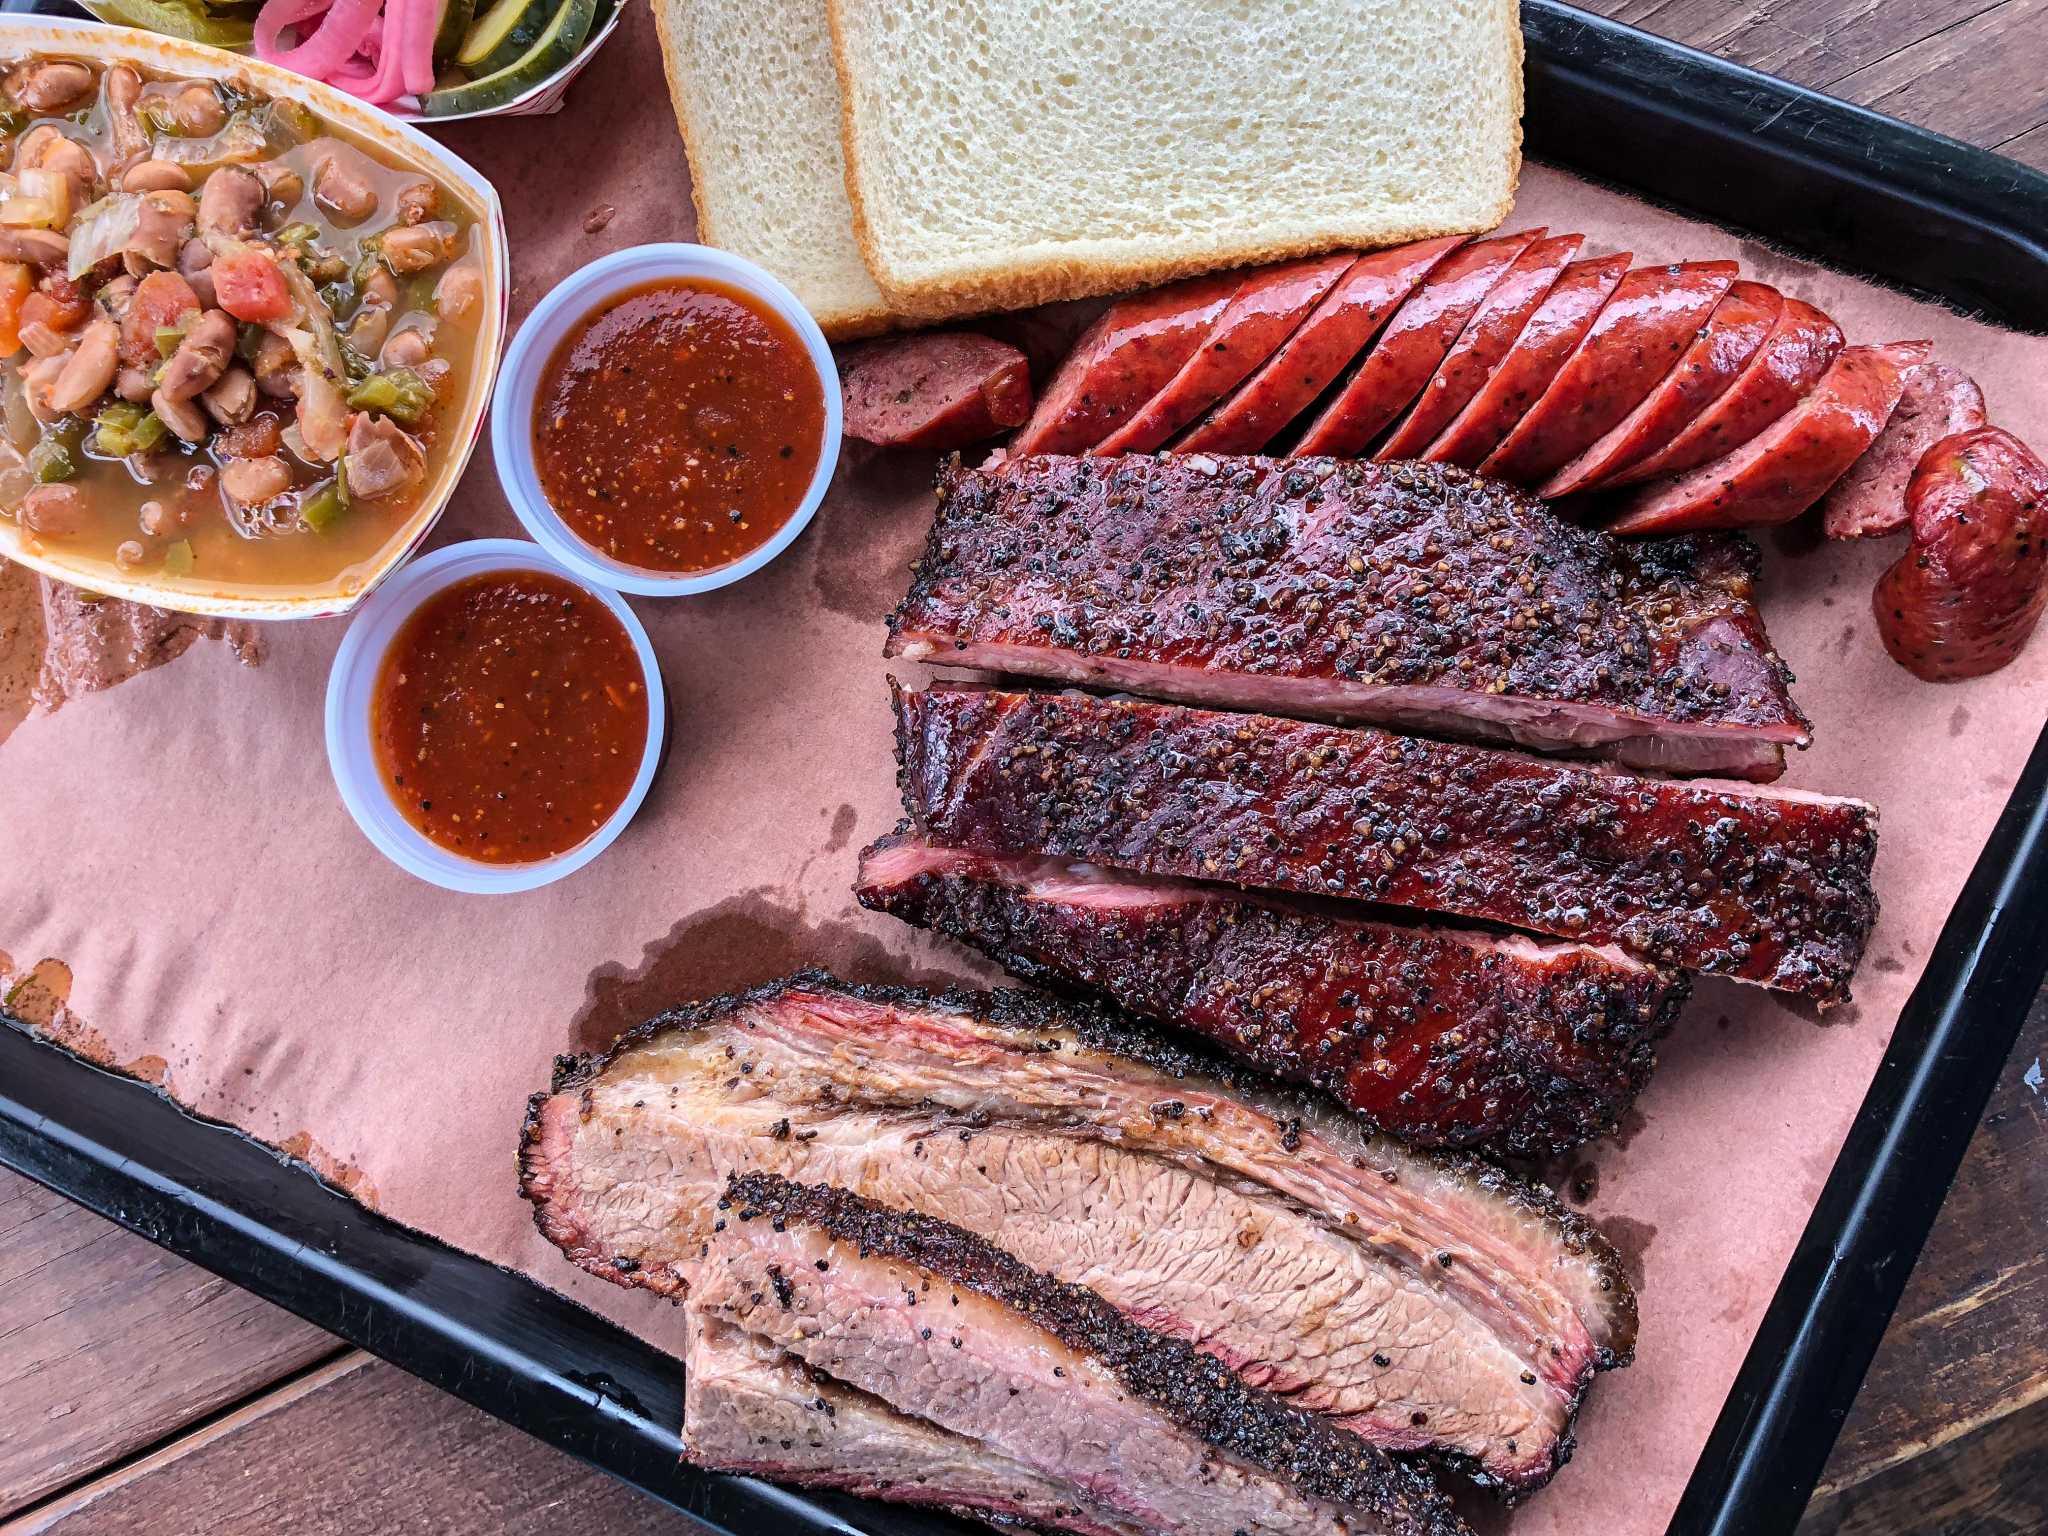 From a Heights dive bar, Willow’s Texas BBQ cooking up some of Houston